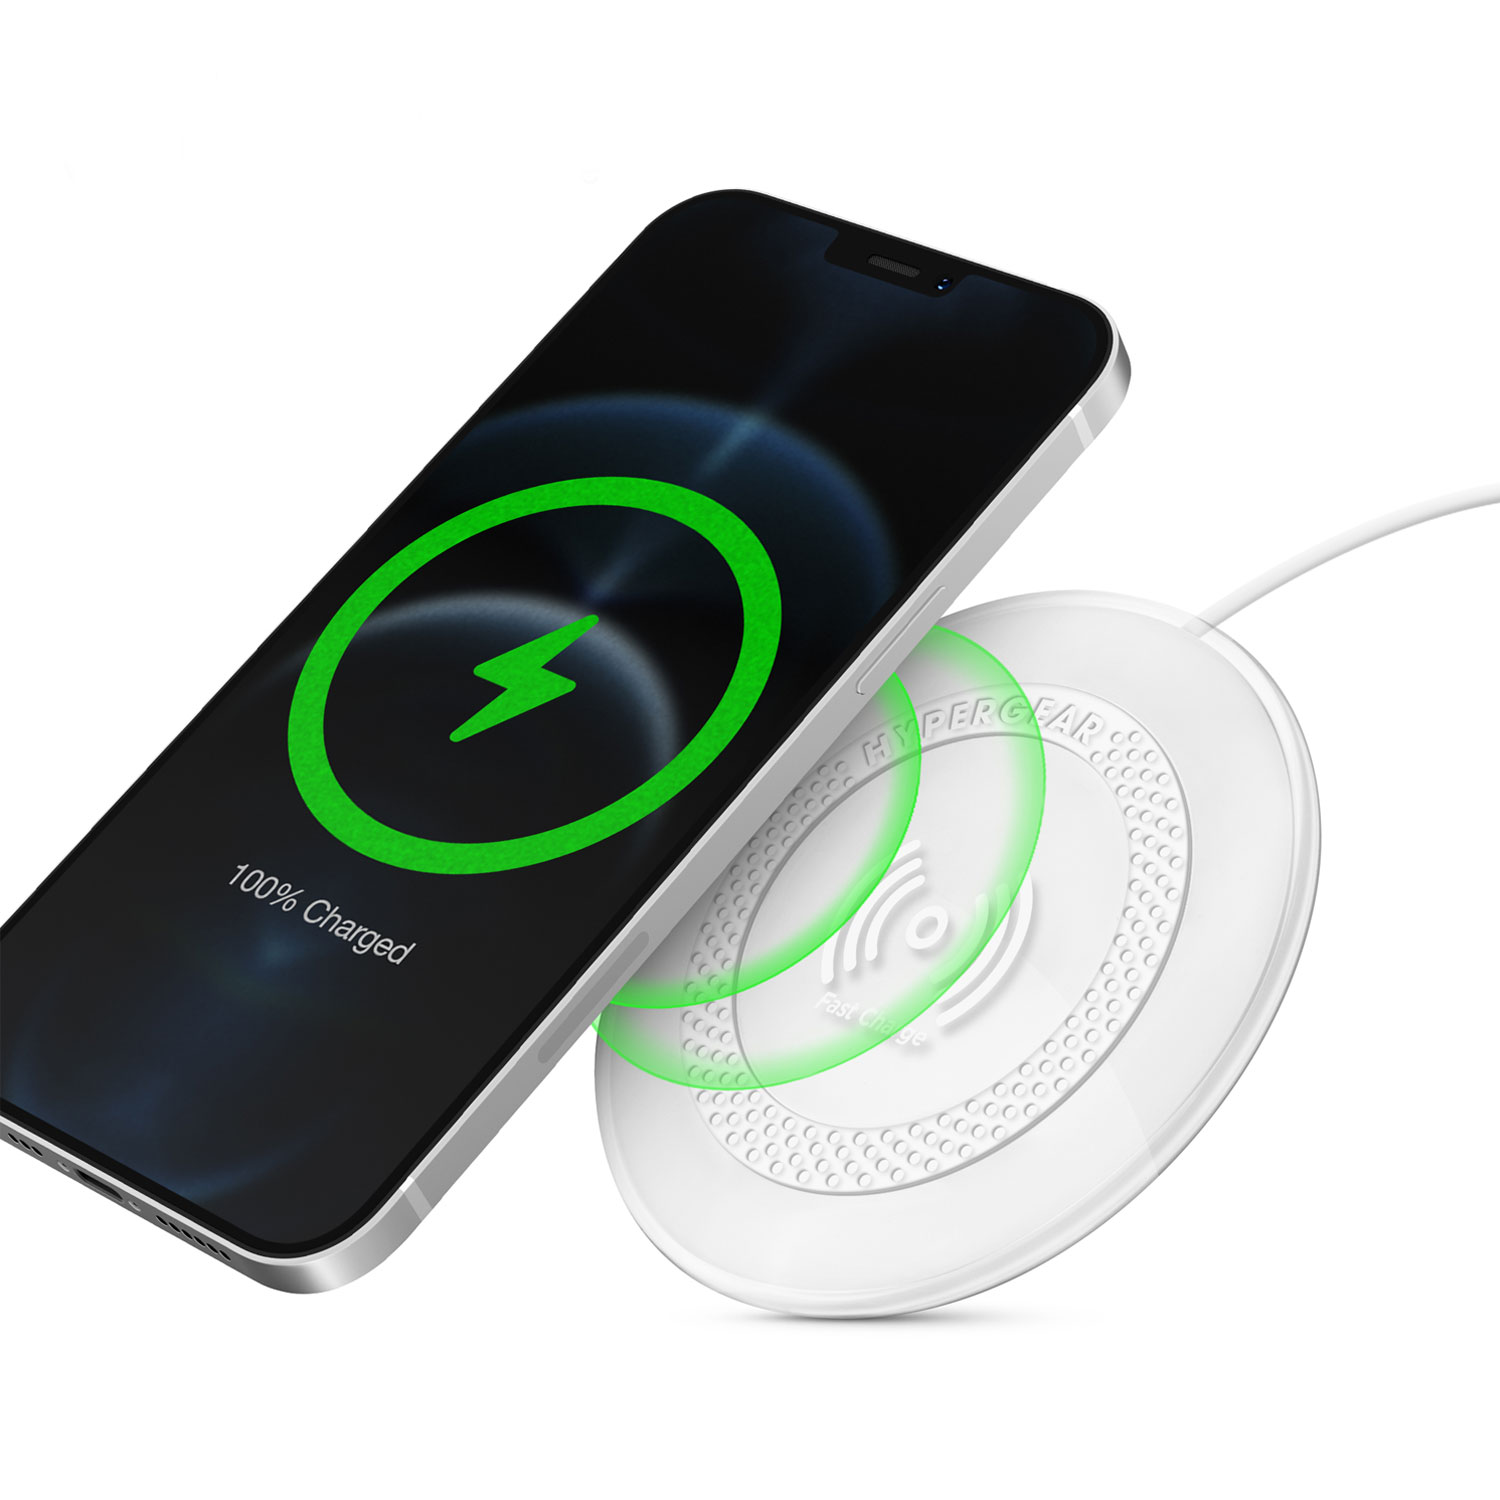 HyperGear Charge Pad Pro 15W Wireless Fast Charger